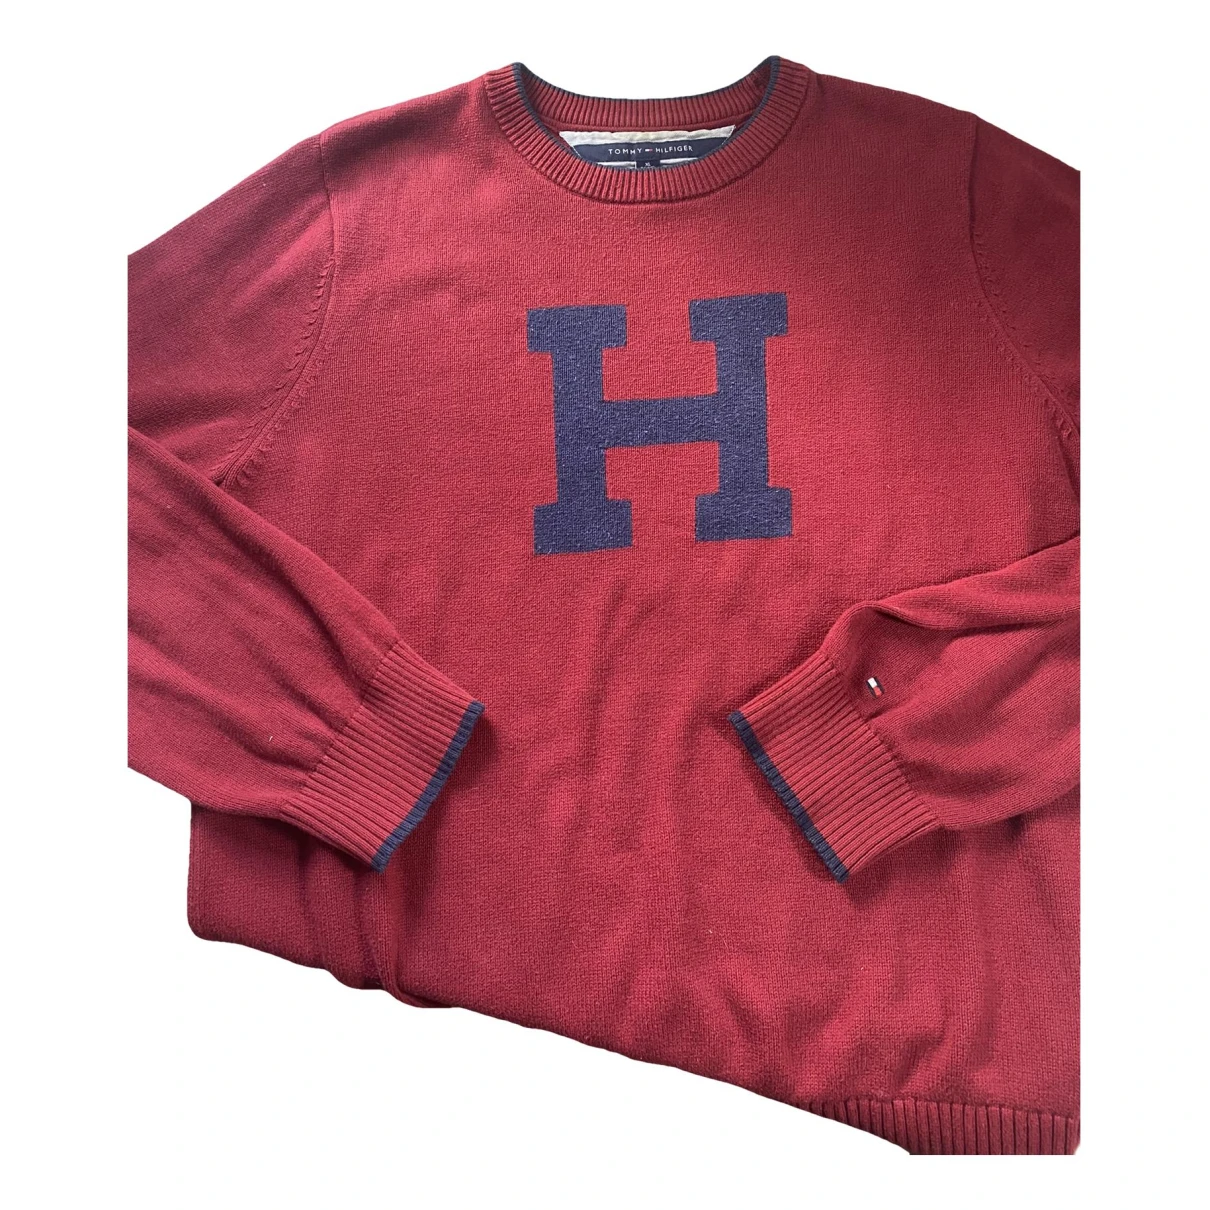 Pre-owned Tommy Hilfiger Pull In Burgundy